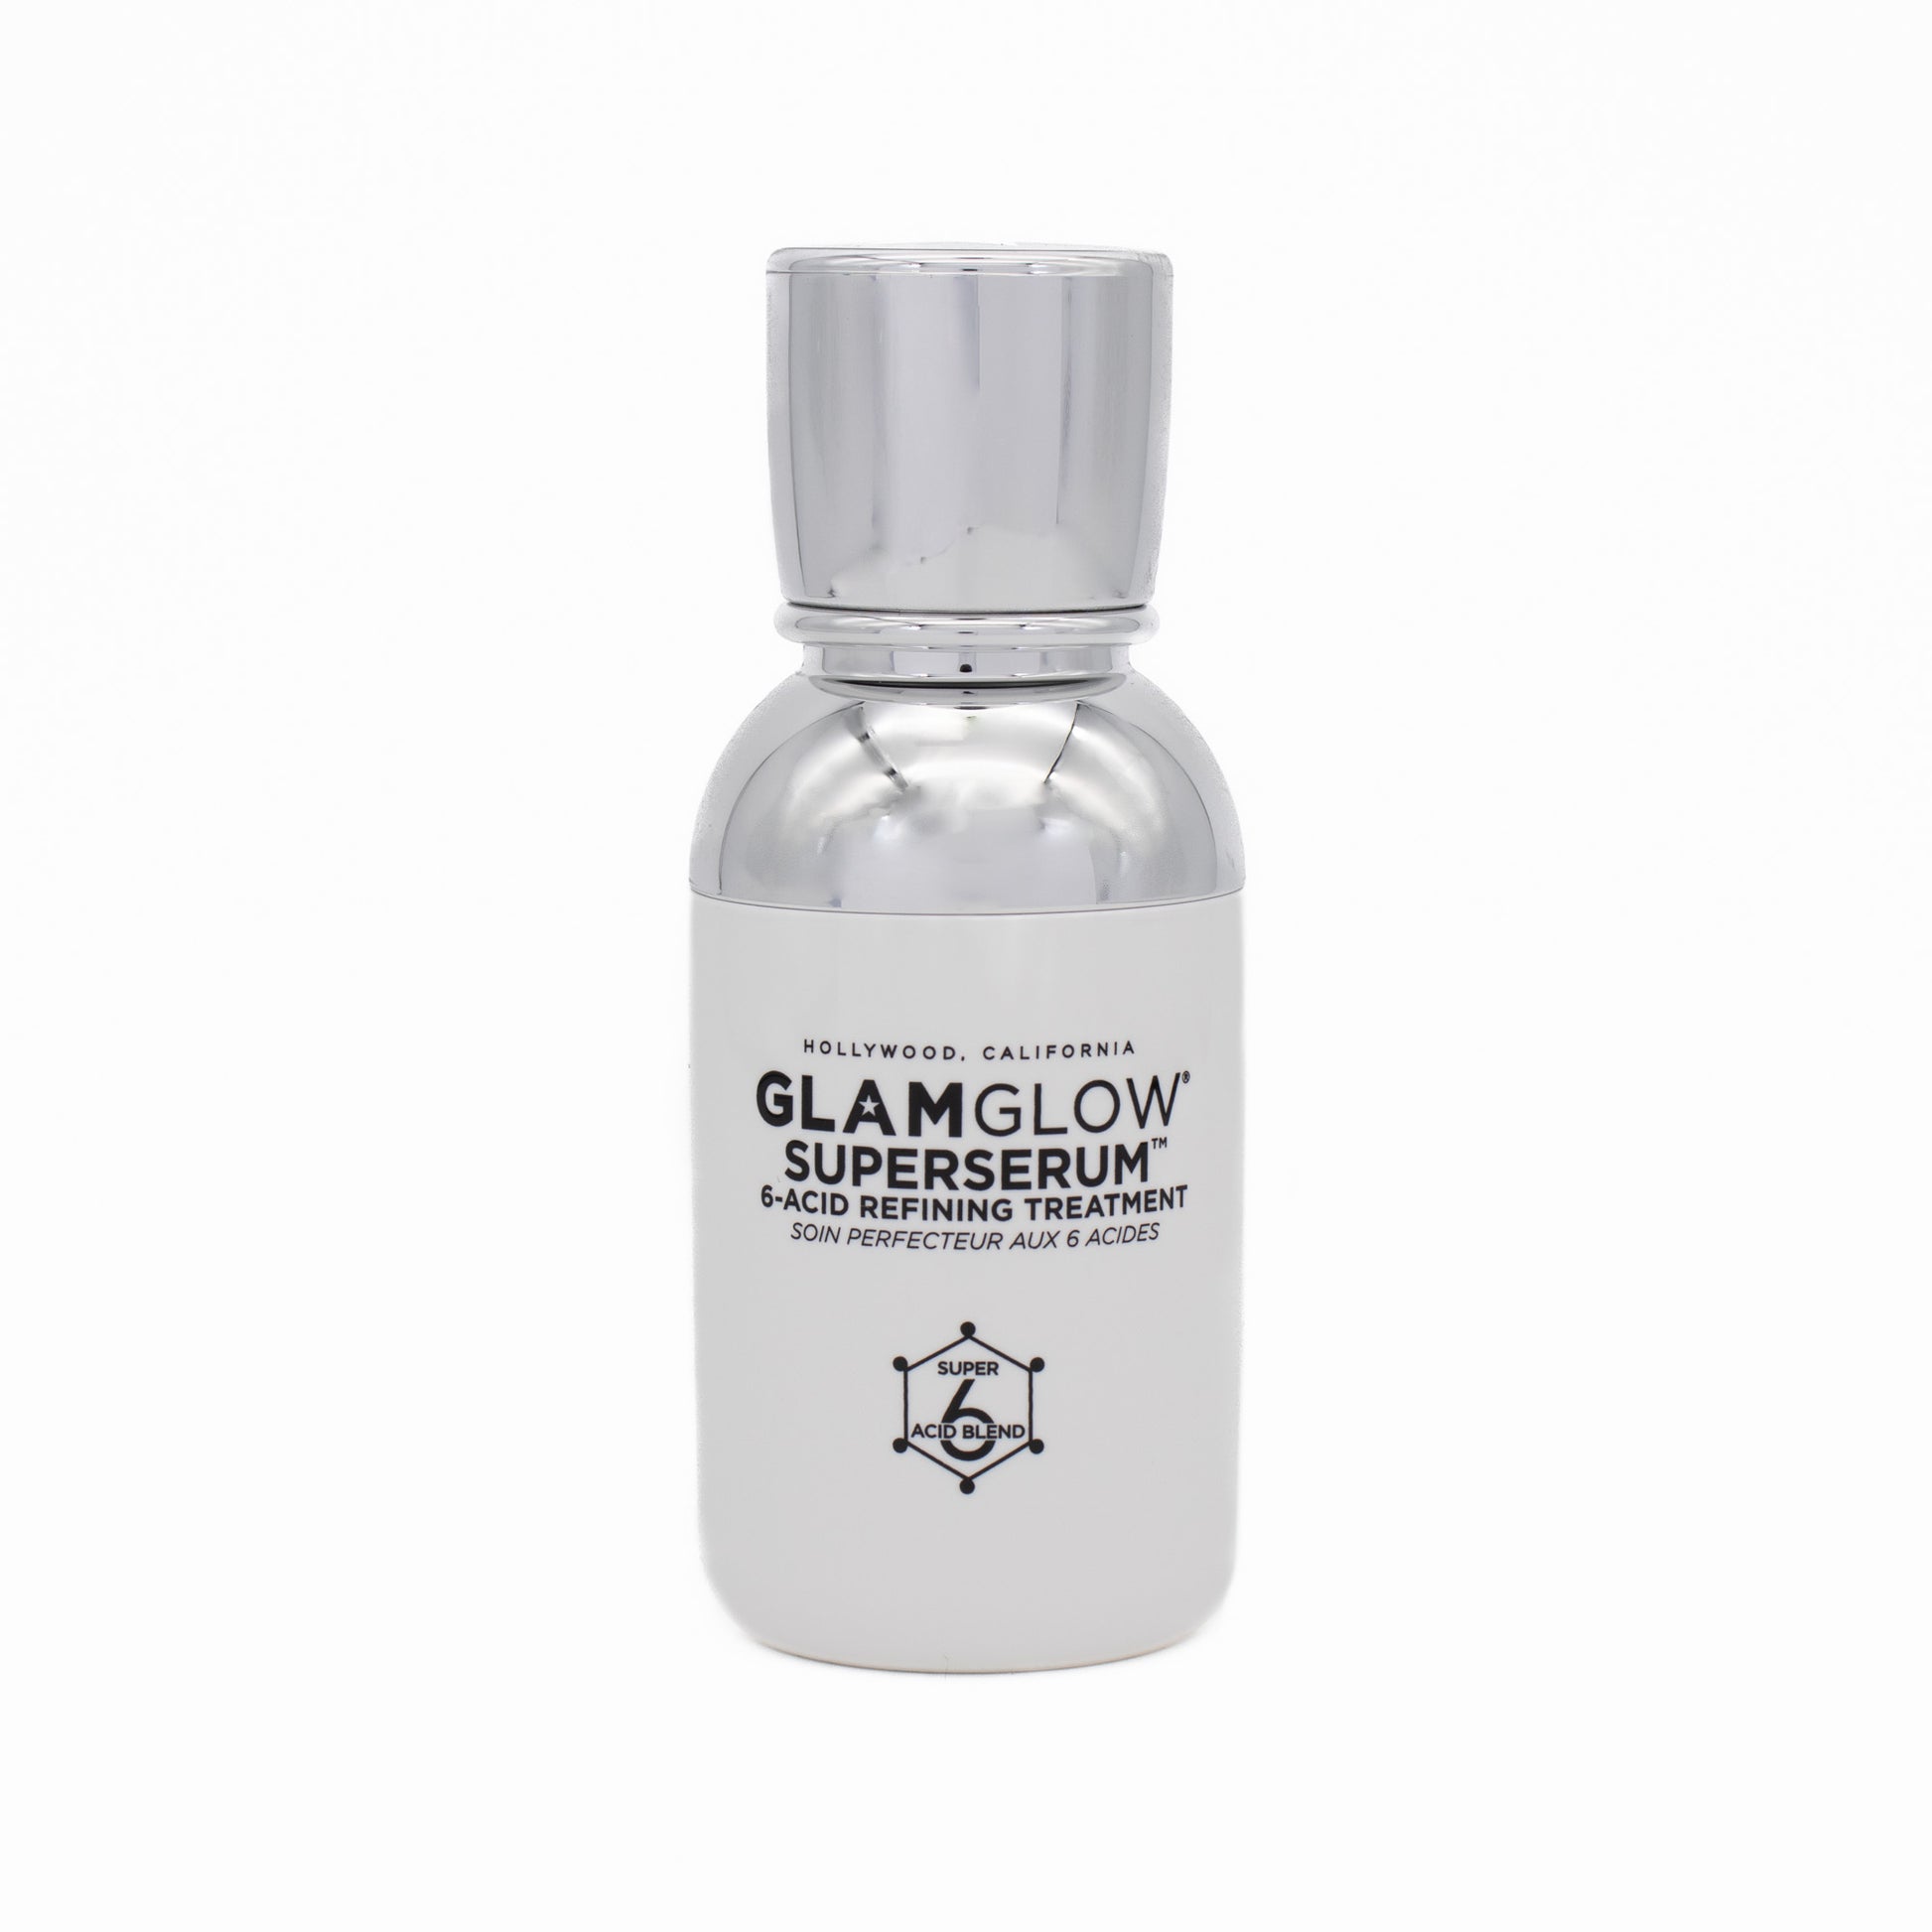 Glamglow Superserum 6-Acid Refining Treatment 30ml - Missing Box - This is Beauty UK